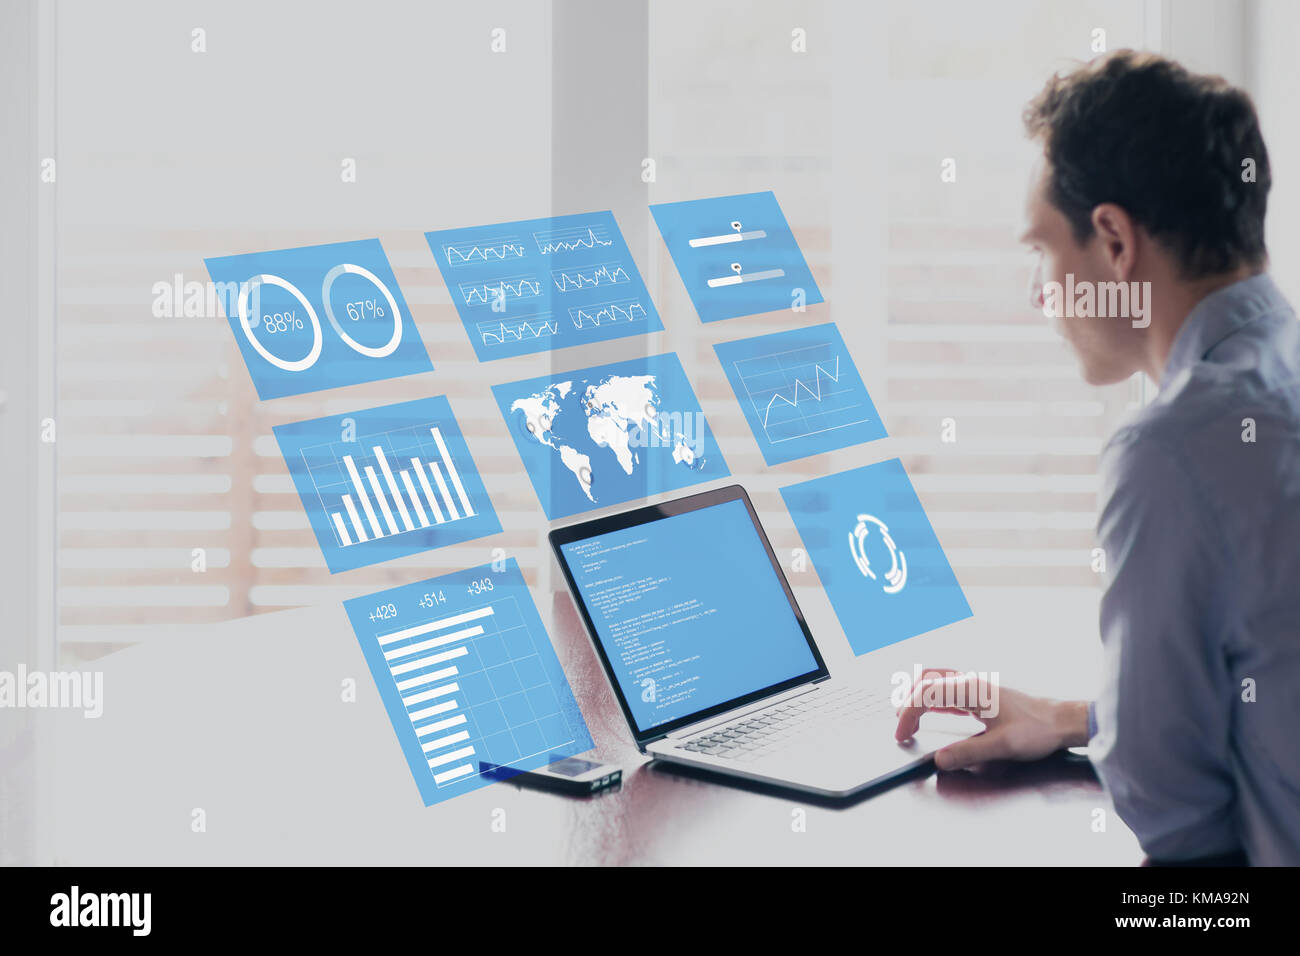 Businessman working with holographic augmented reality (AR) screen technology to analyze business analytics key performance indicator and charts on fi Stock Photo